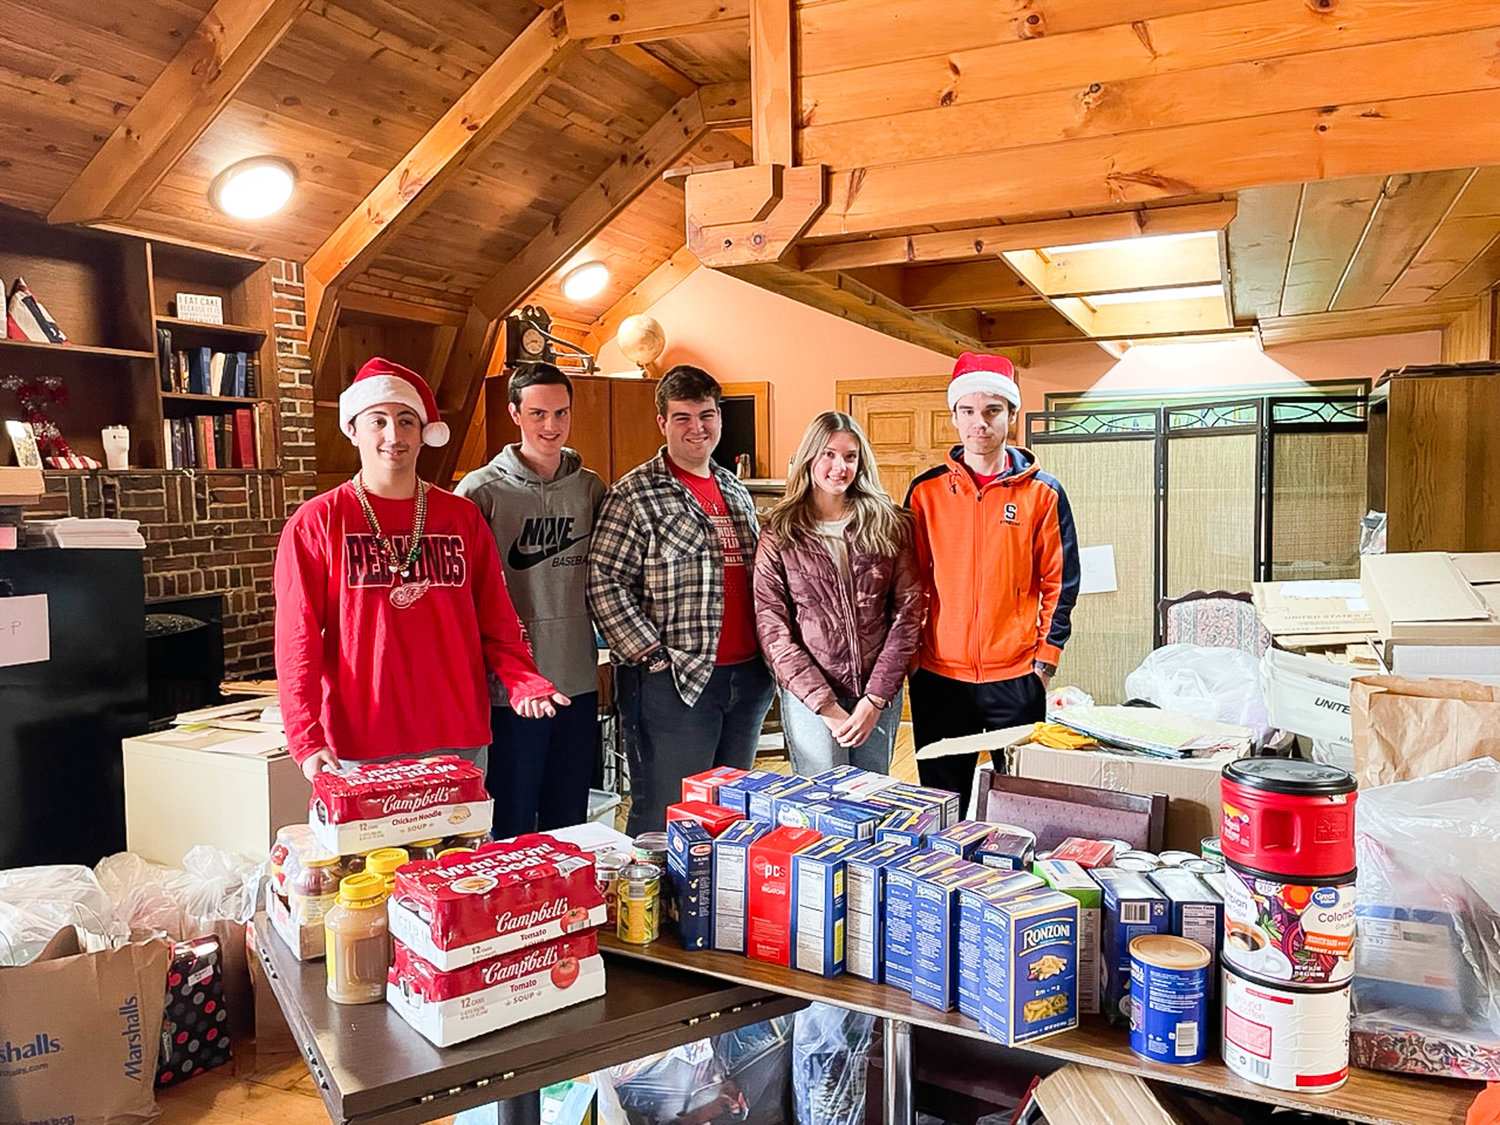 Notre Dame Junior/Senior High School seniors, from left, Santino Alsante, Trey Murnane, Paul Caruso, Carli Grabinski and Casimir Krauza delivered food Dec. 21 from their food pantry at the Utica school to the Rome Rescue Mission.